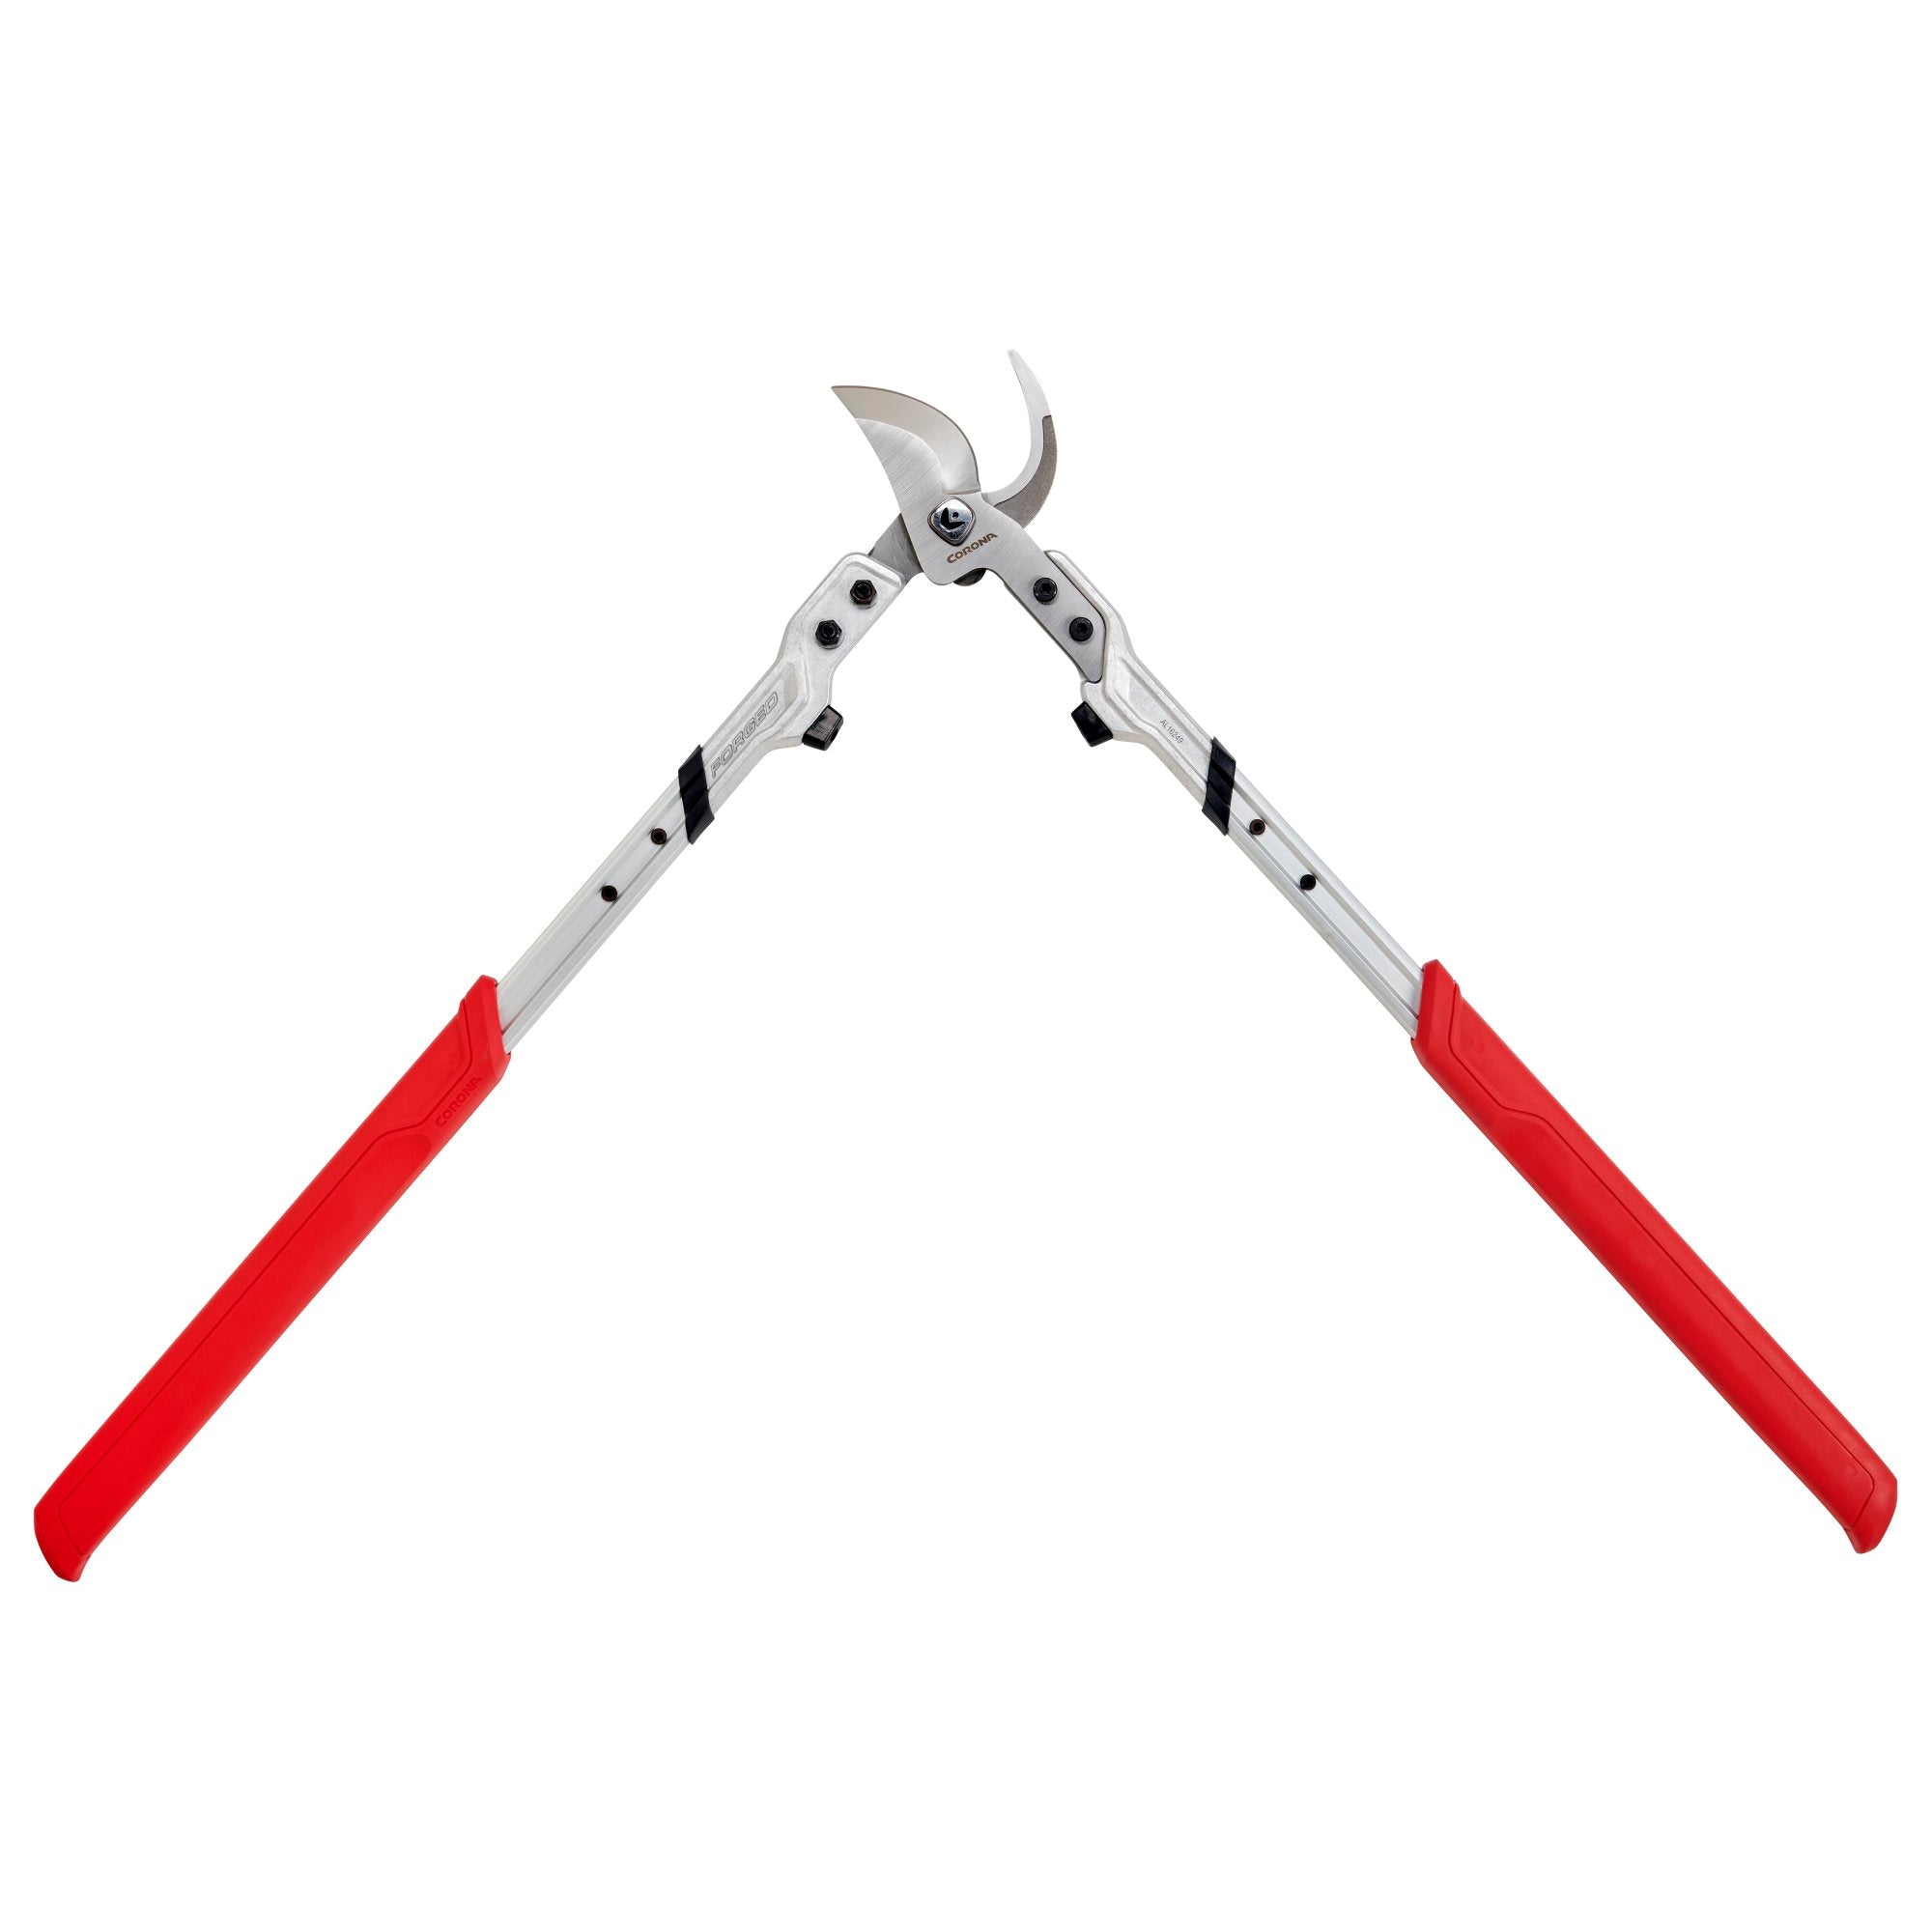 XSeries Pro Bypass Lopper, 2-1/4 in. Cut Capacity